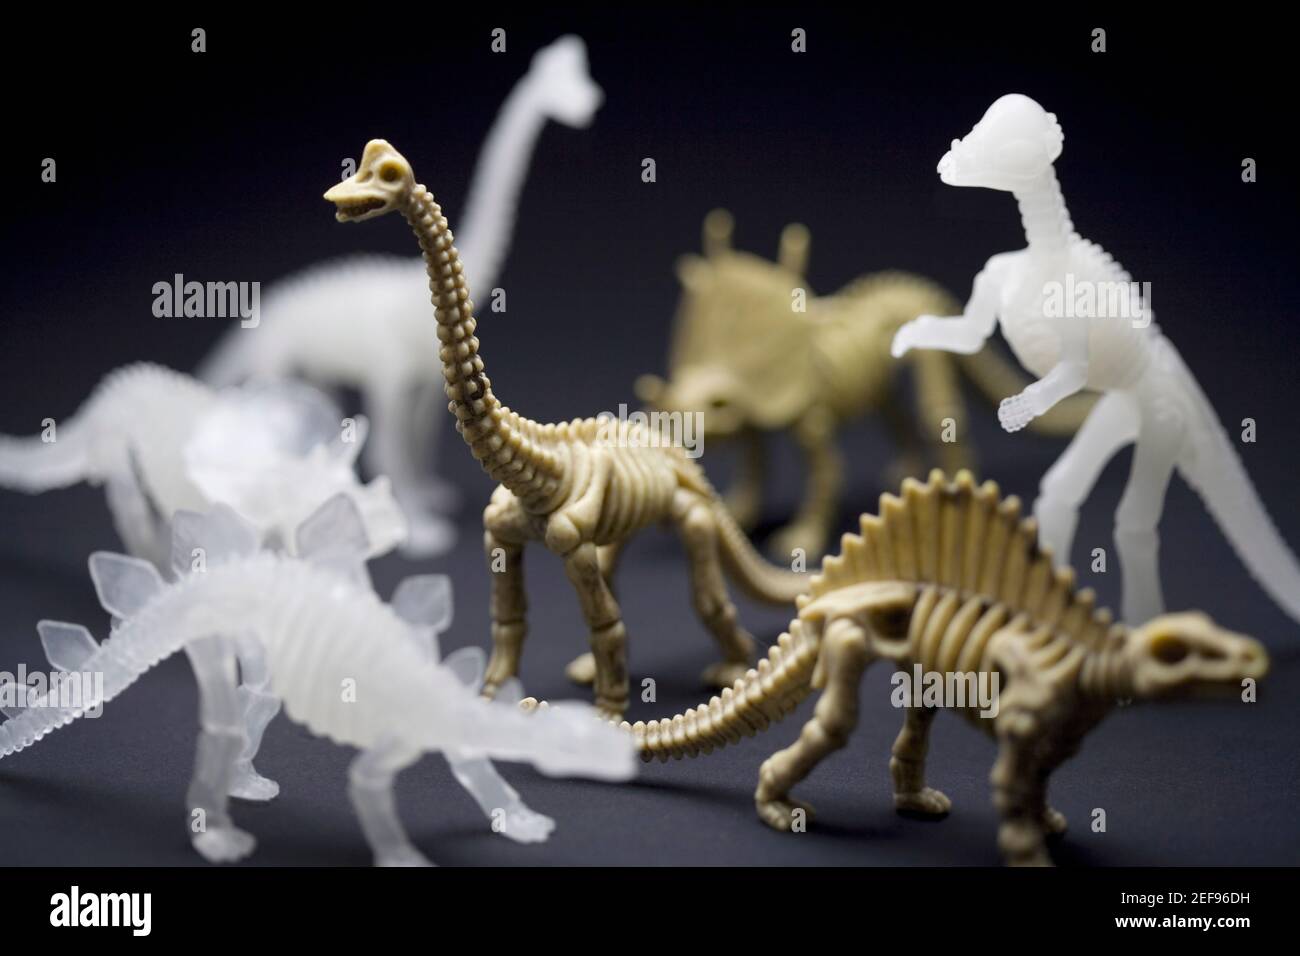 Close-up of models of dinosaurs Stock Photo